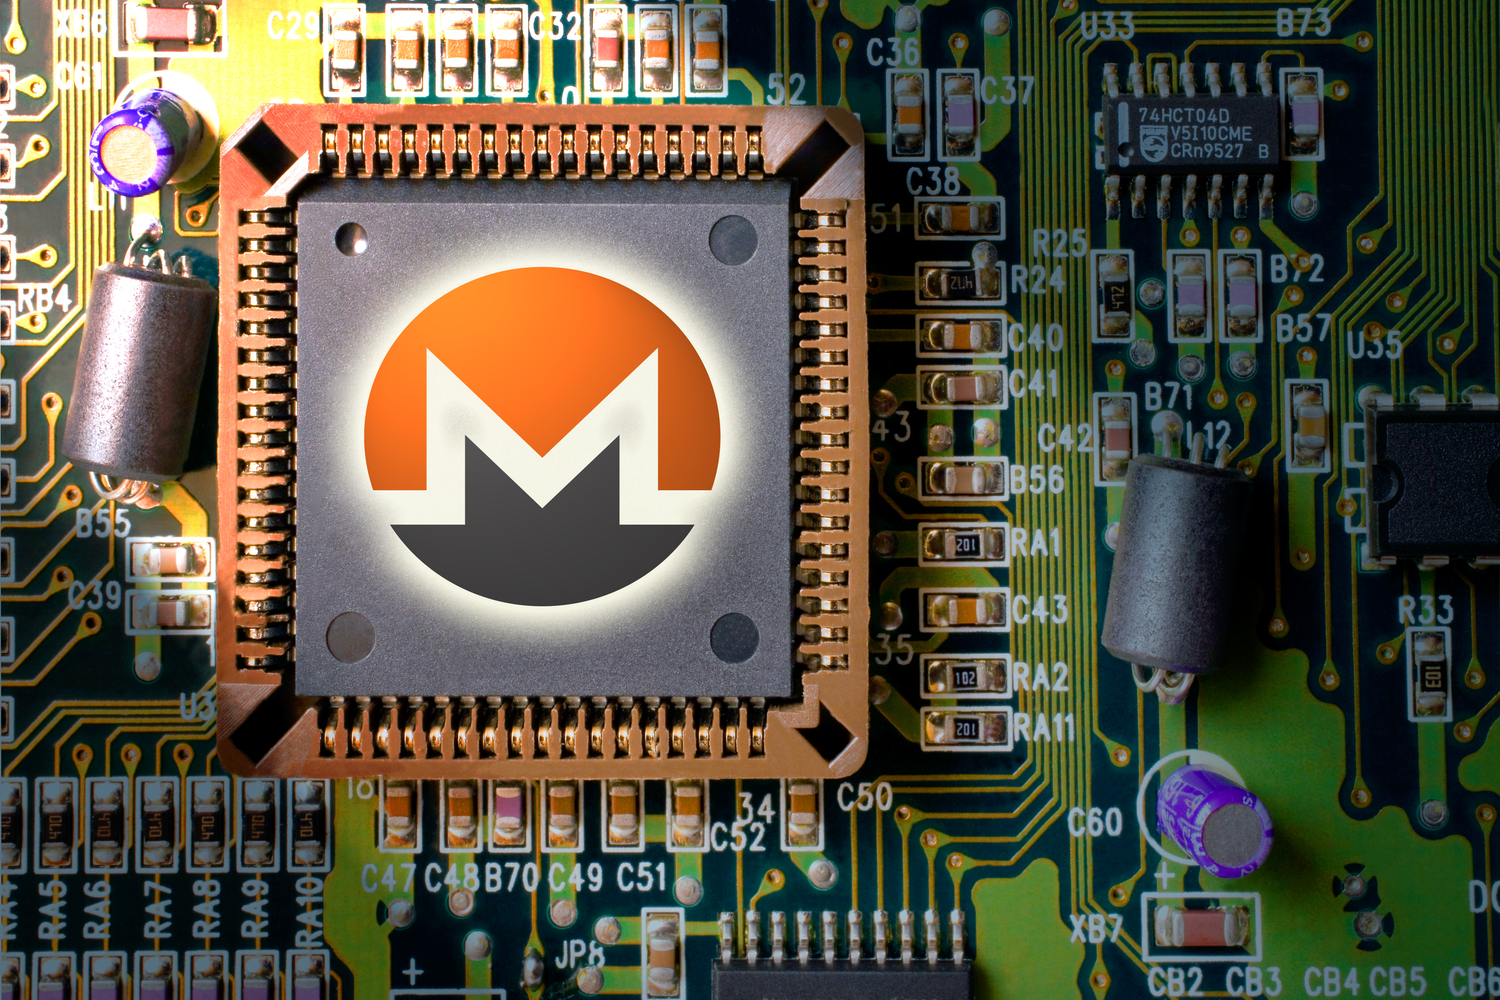 Monero Hacker Group ‘Outlaw’ Is Again and Focusing on American Enterprise: Report